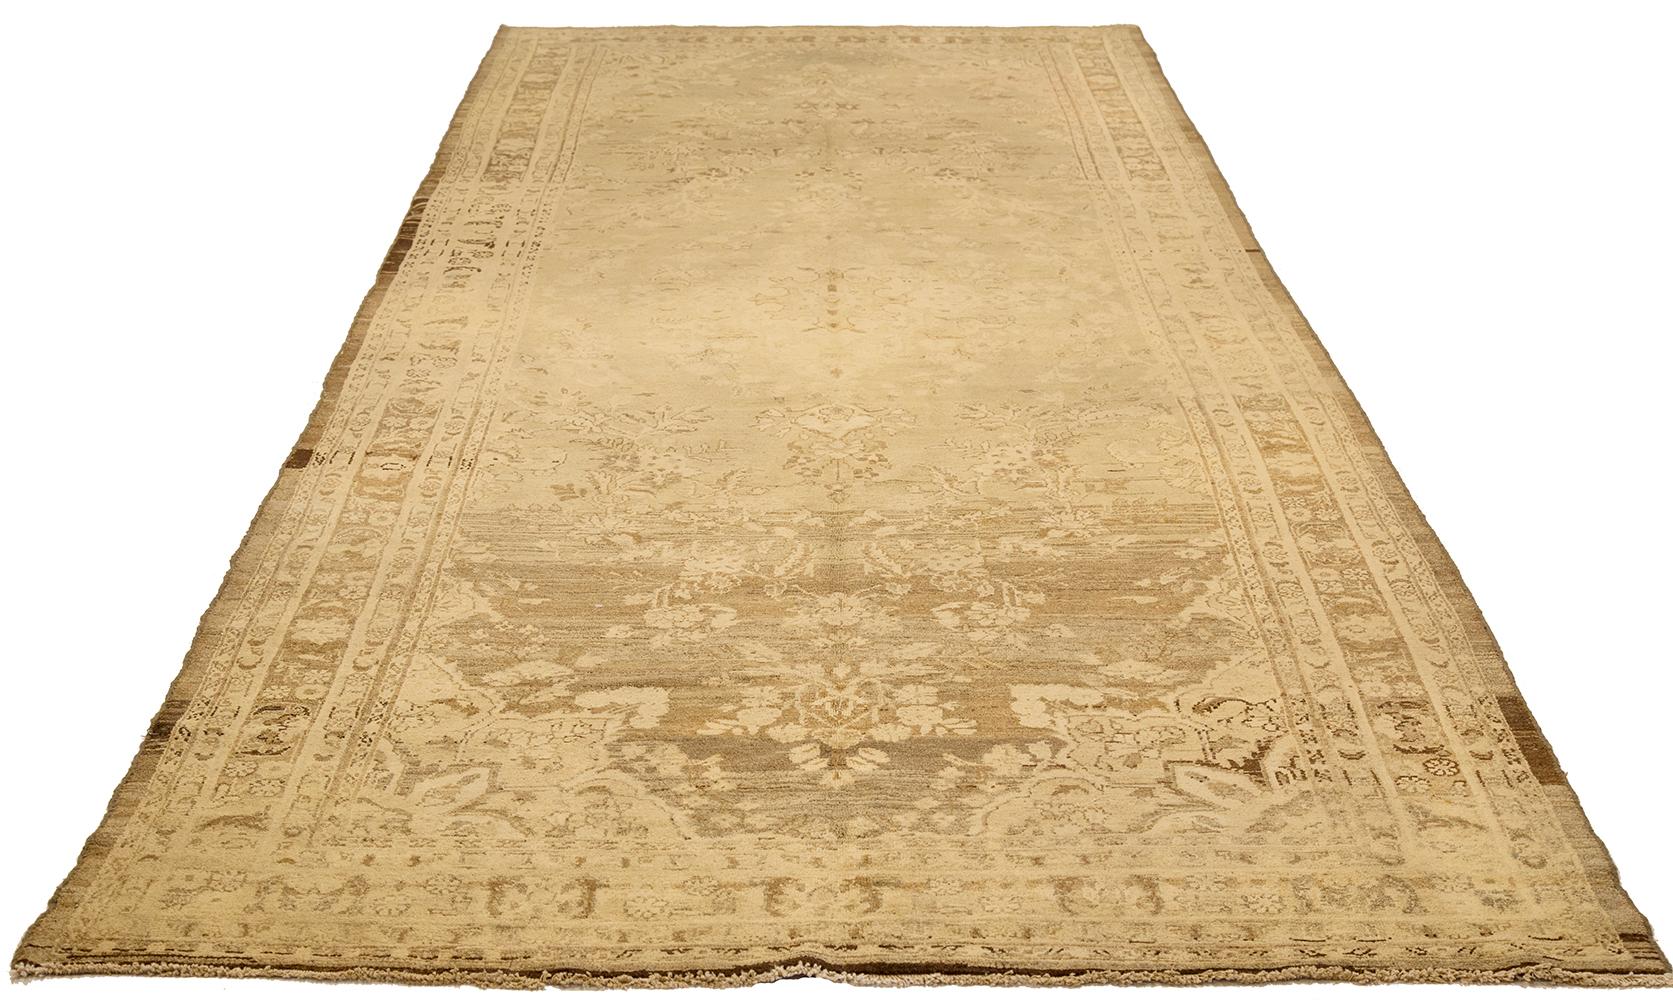 Antique Persian runner rug handwoven from the finest sheep’s wool and colored with all-natural vegetable dyes that are safe for humans and pets. It’s a traditional Malayer design featuring ivory and brown floral details over a beige field. It’s a